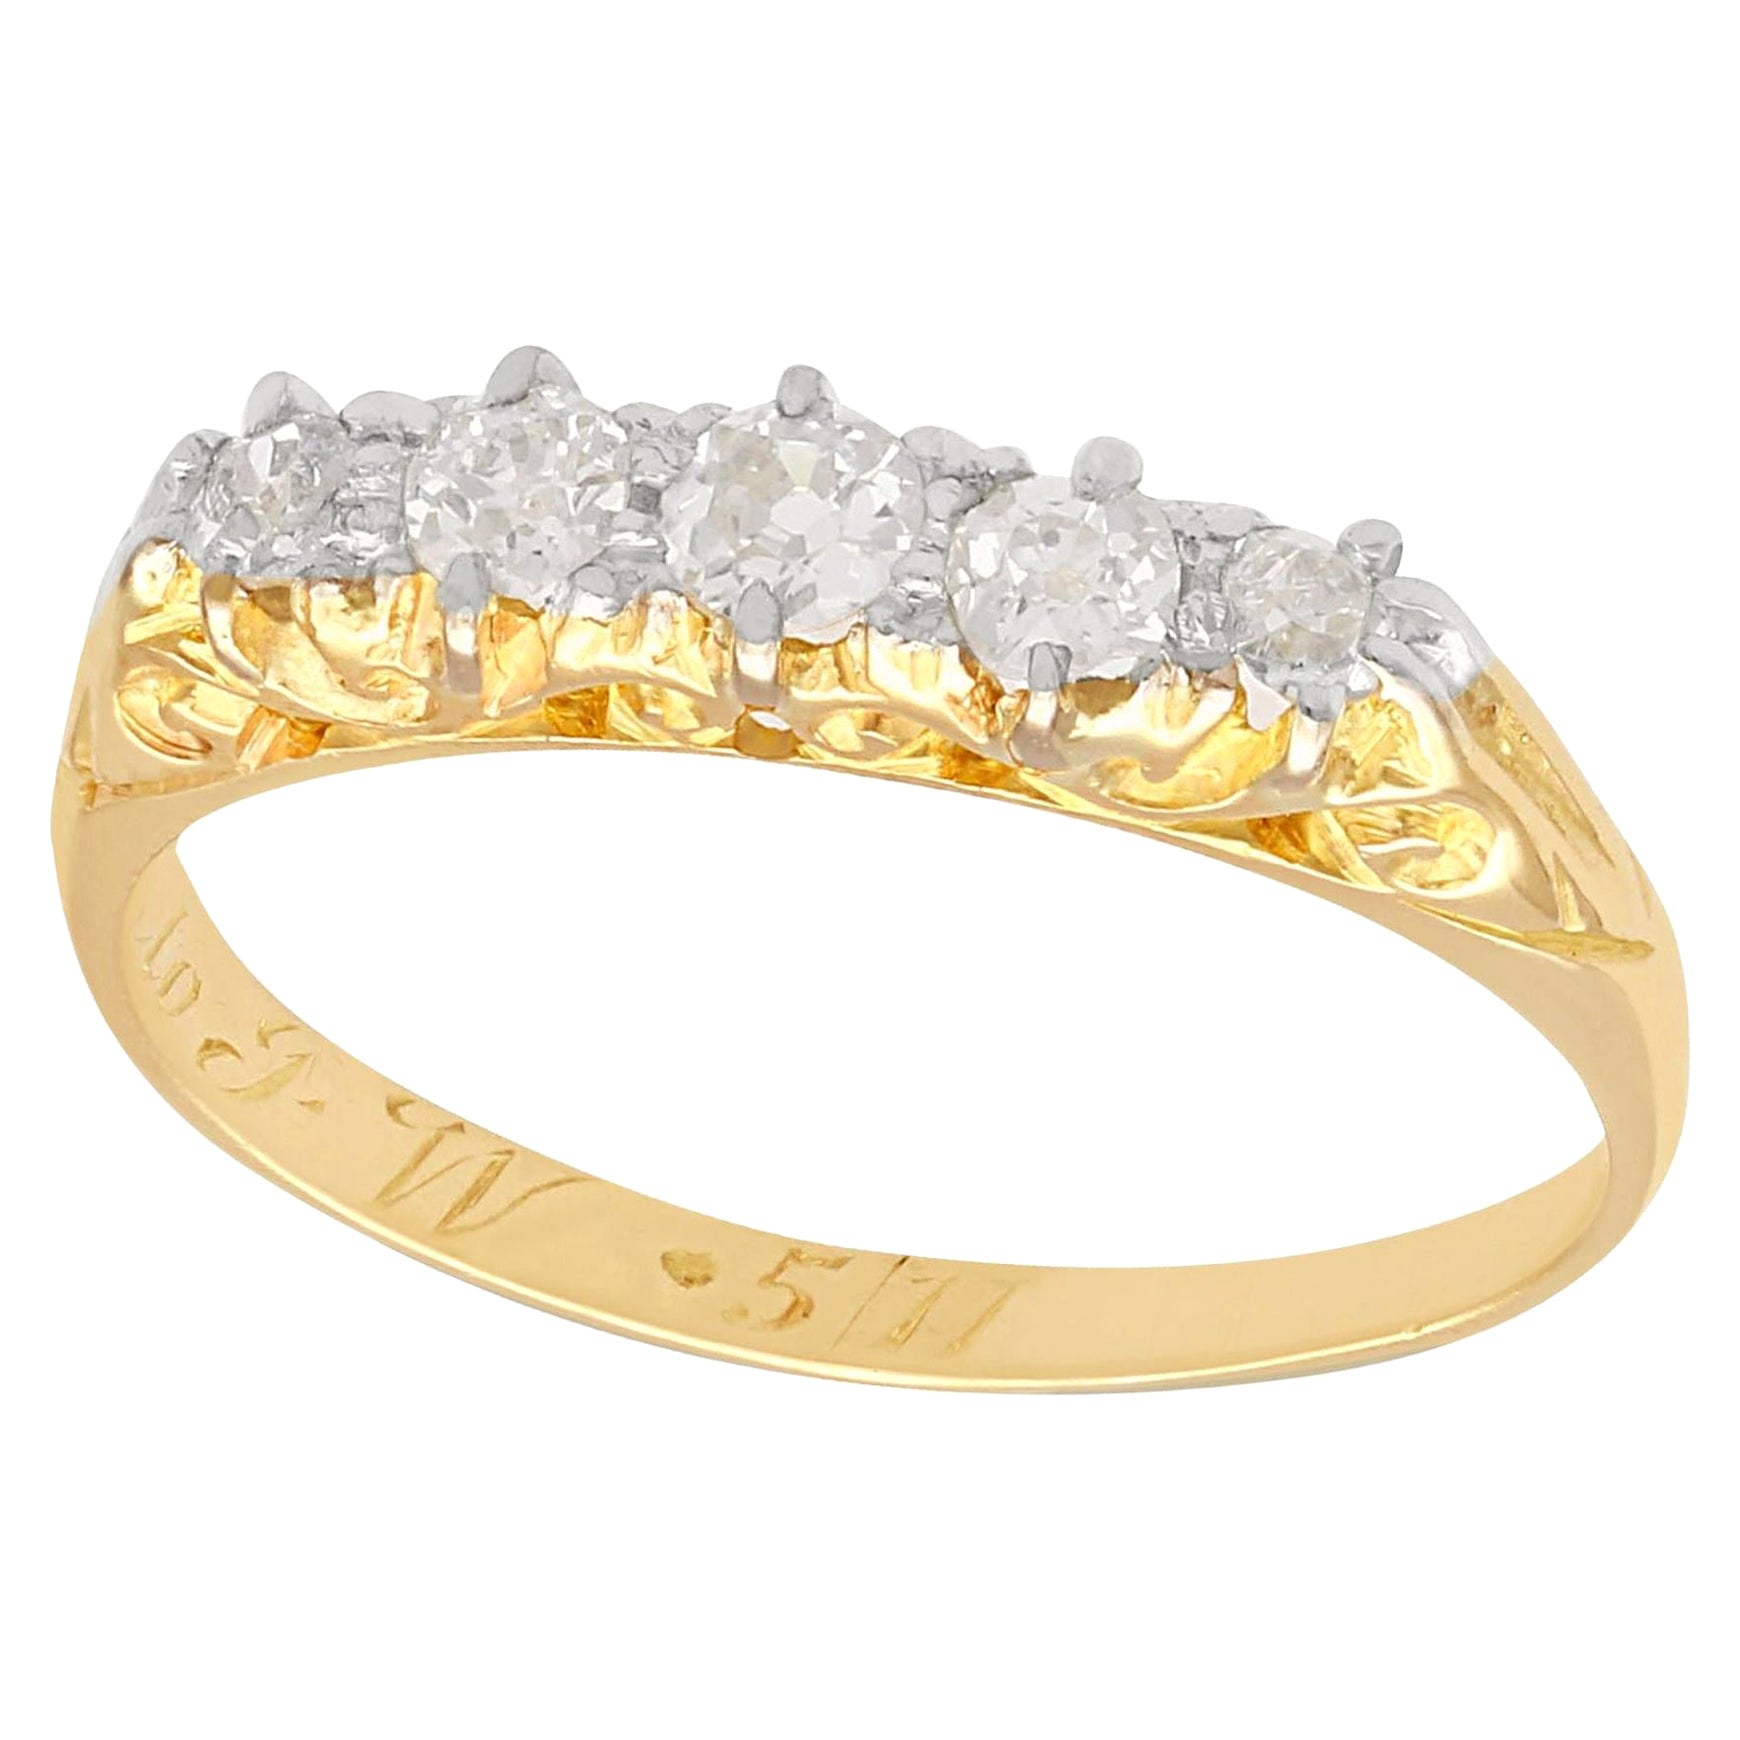 1910s Antique Diamond and Yellow Gold Five-Stone Ring